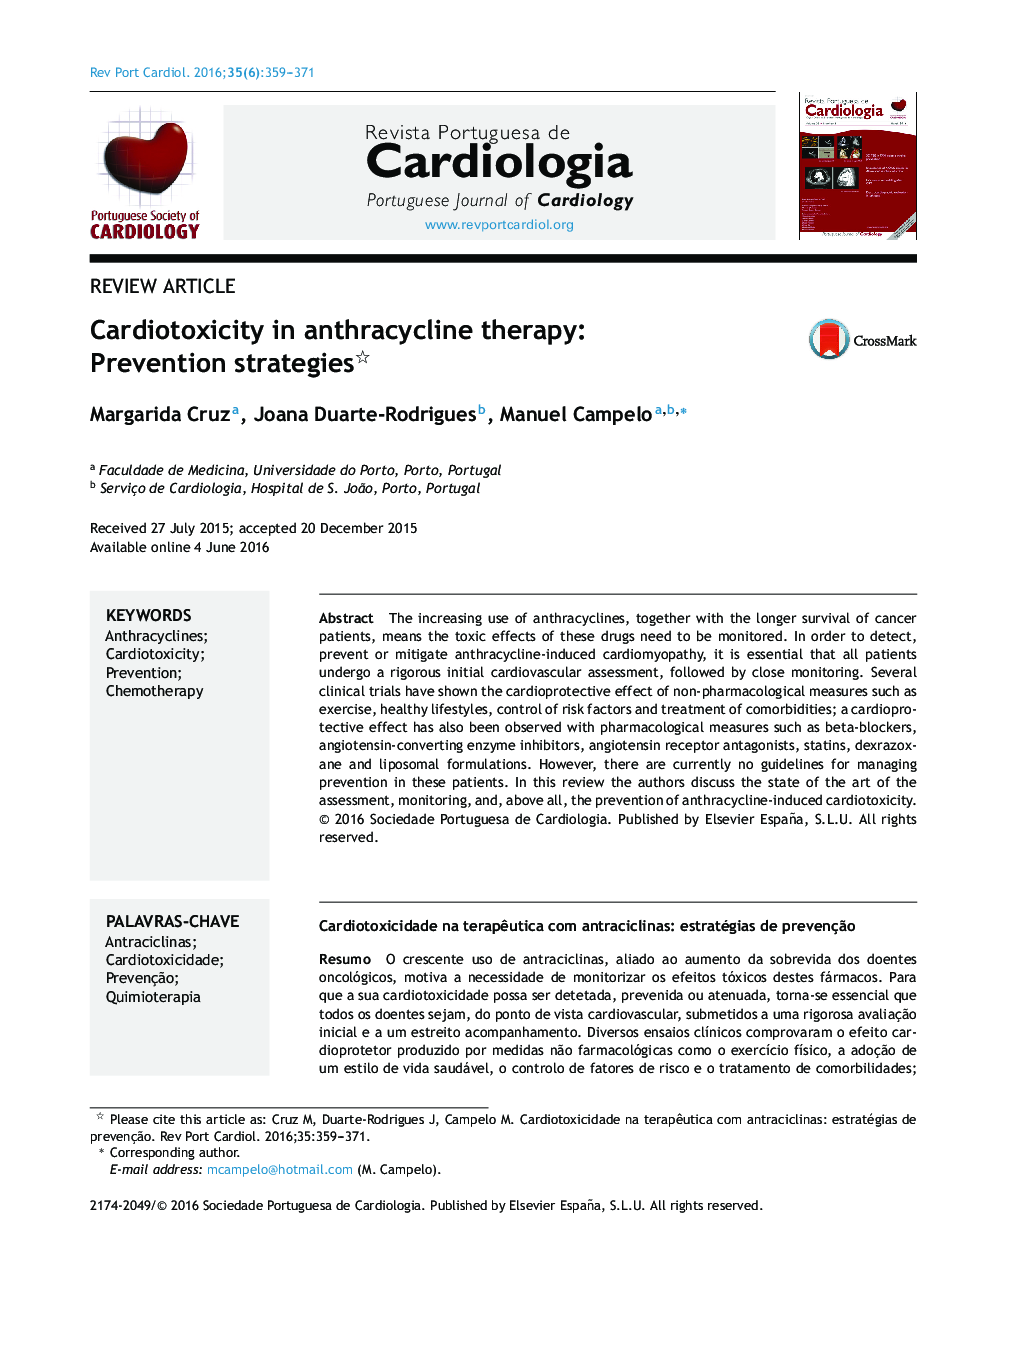 Cardiotoxicity in anthracycline therapy: Prevention strategies 